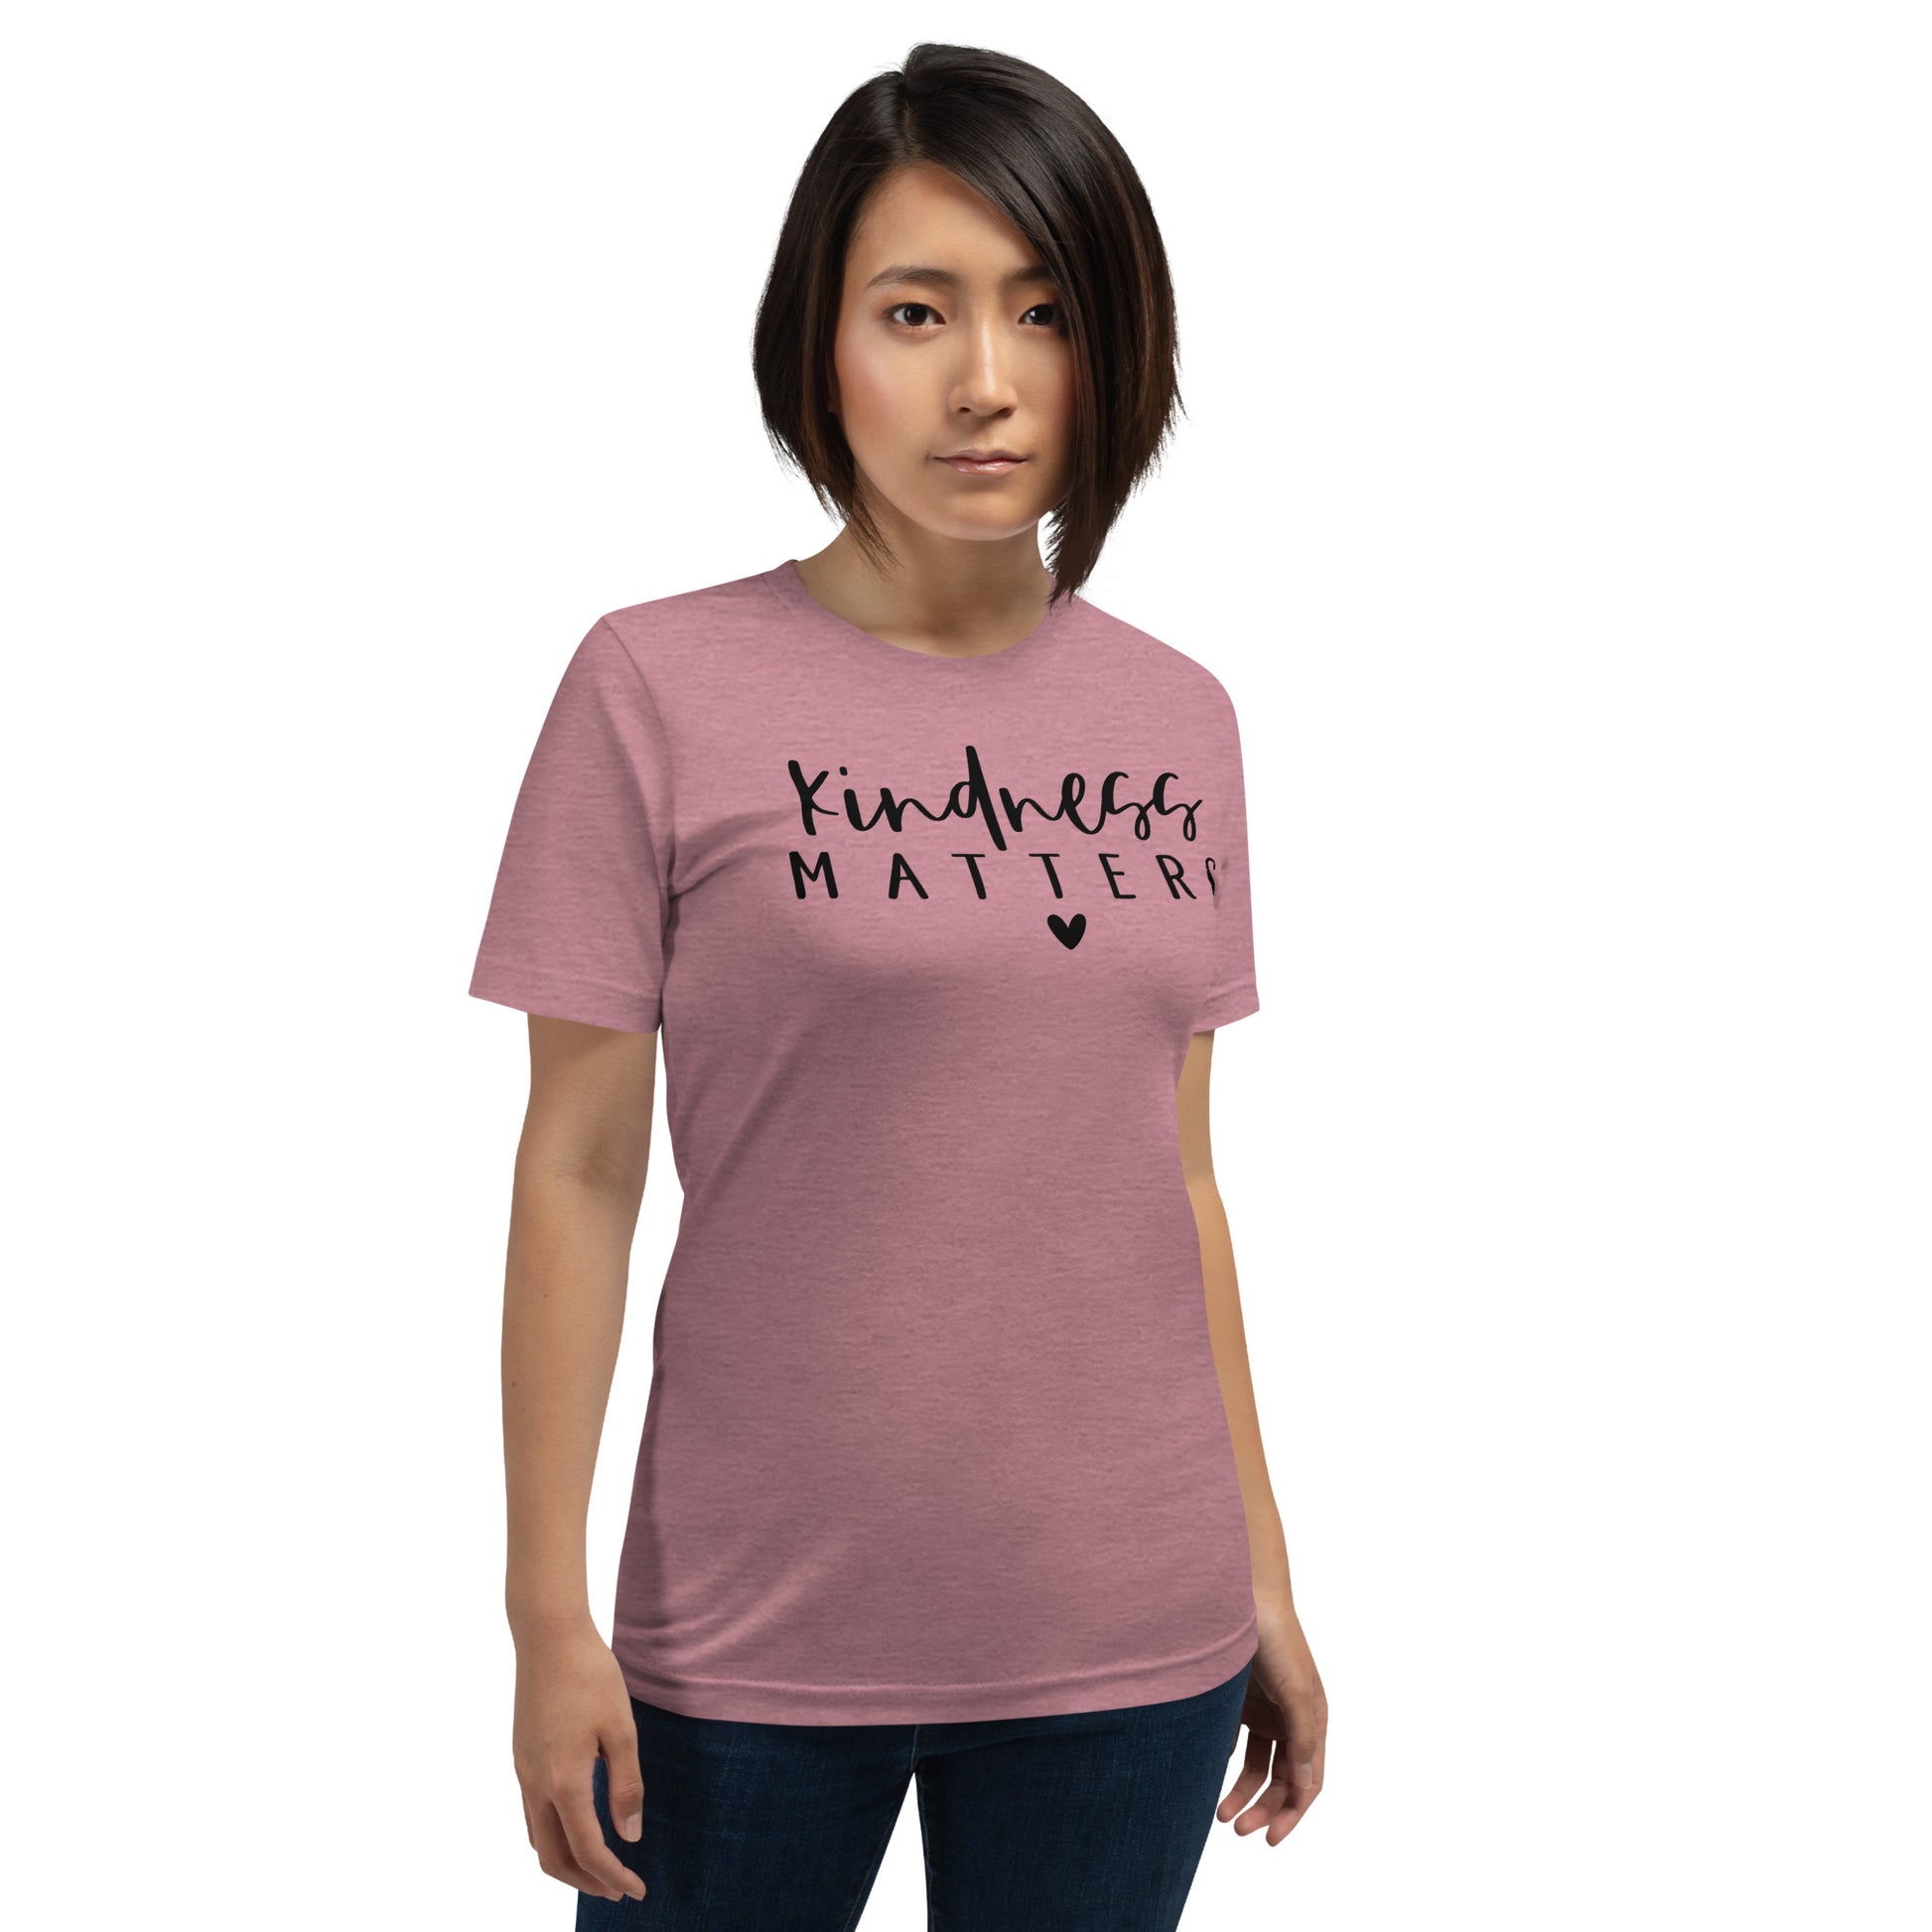 Embrace the Power of Kindness with our Statement "Kindness Matters" T-shirt